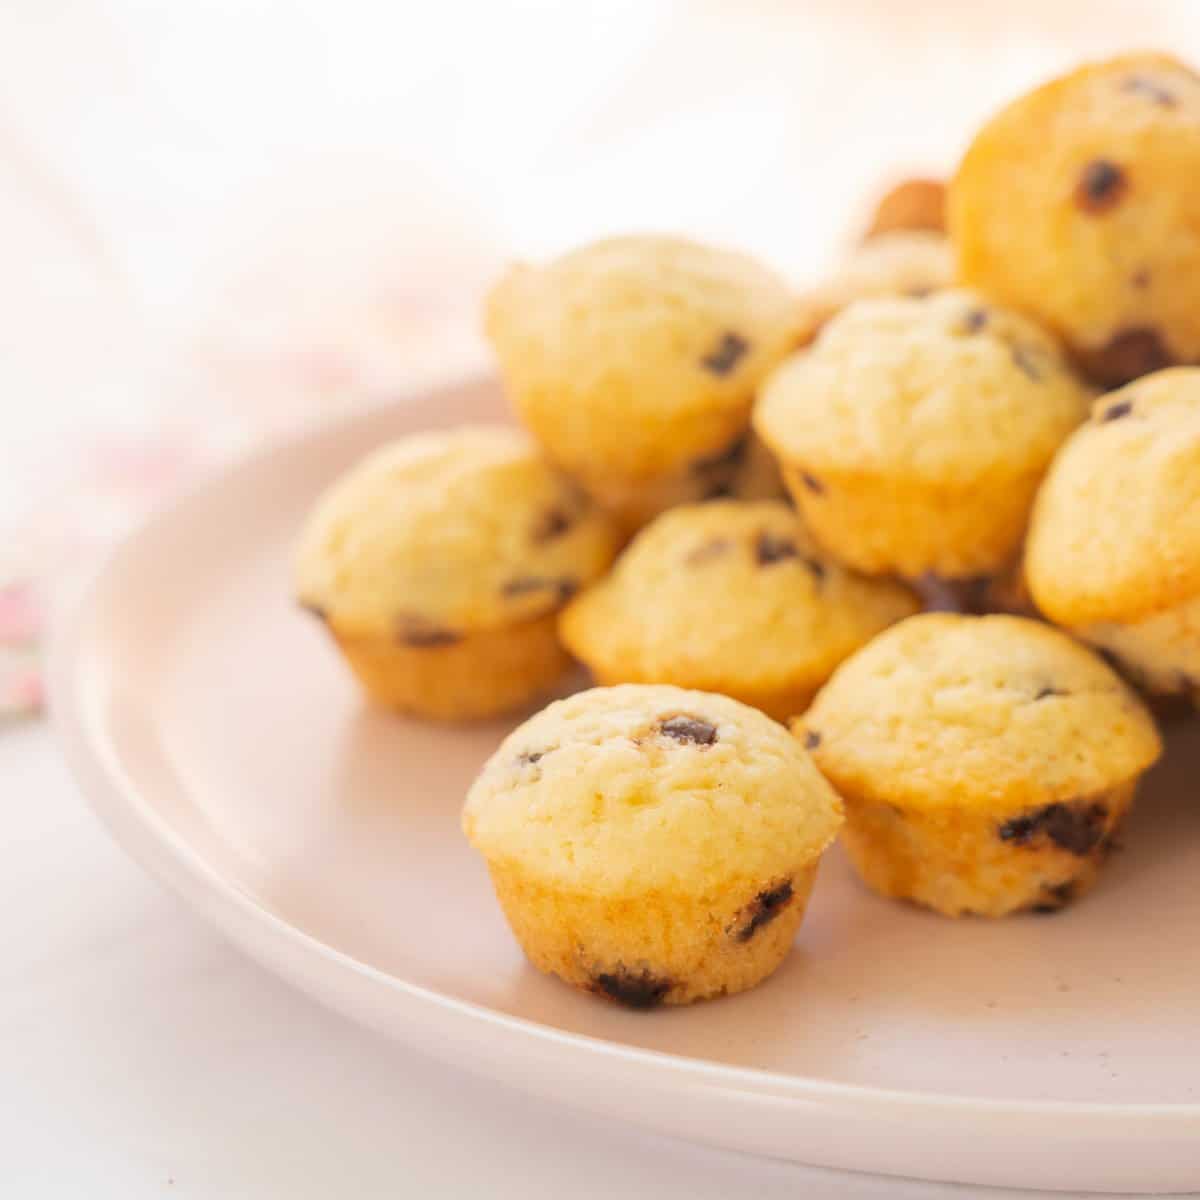 Mini muffins piled on a pink plate.